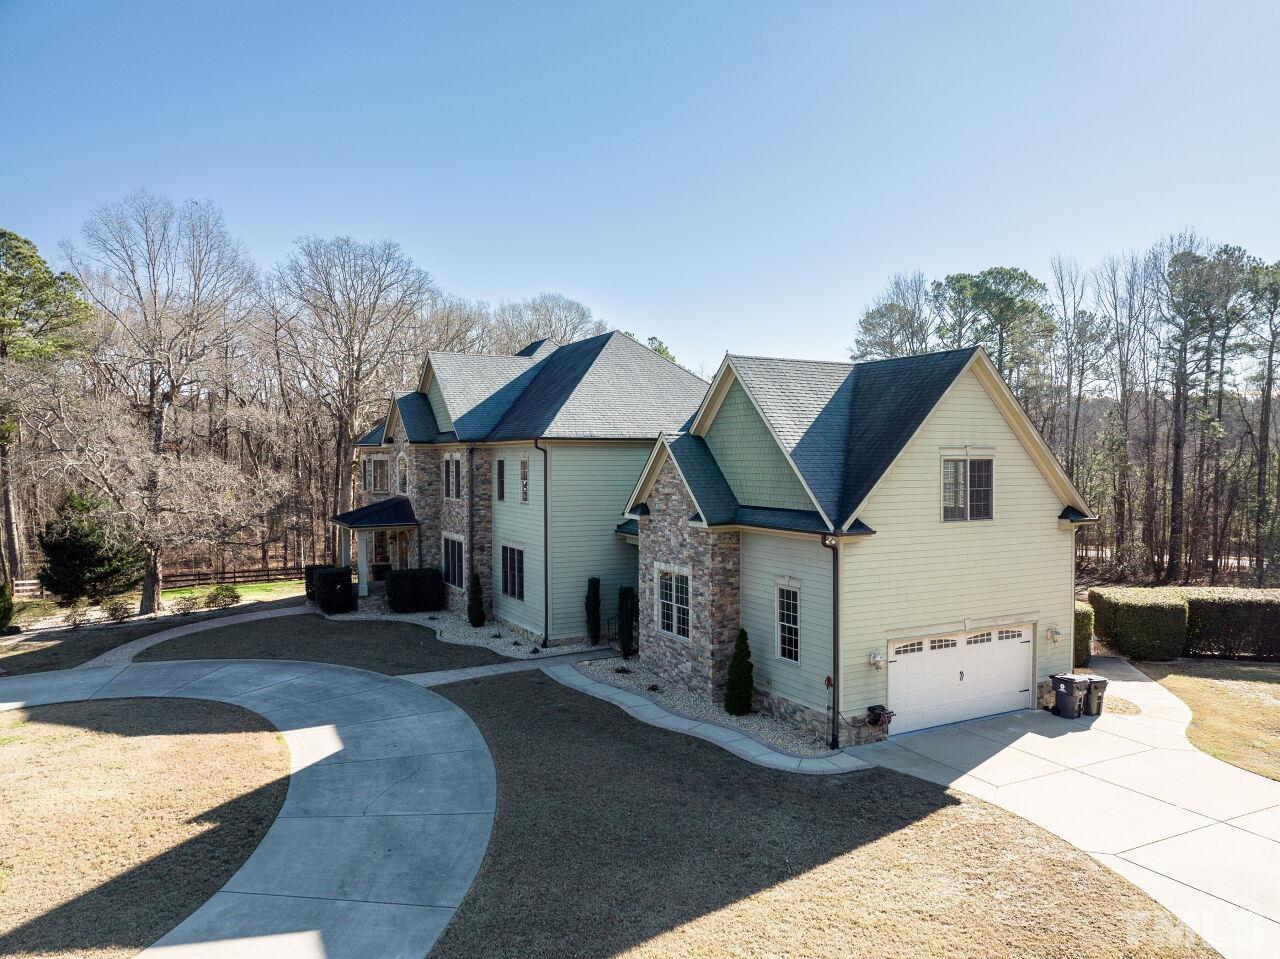 2-car garage, parking pad, circular driveway and a stately entrance - what more could you need?